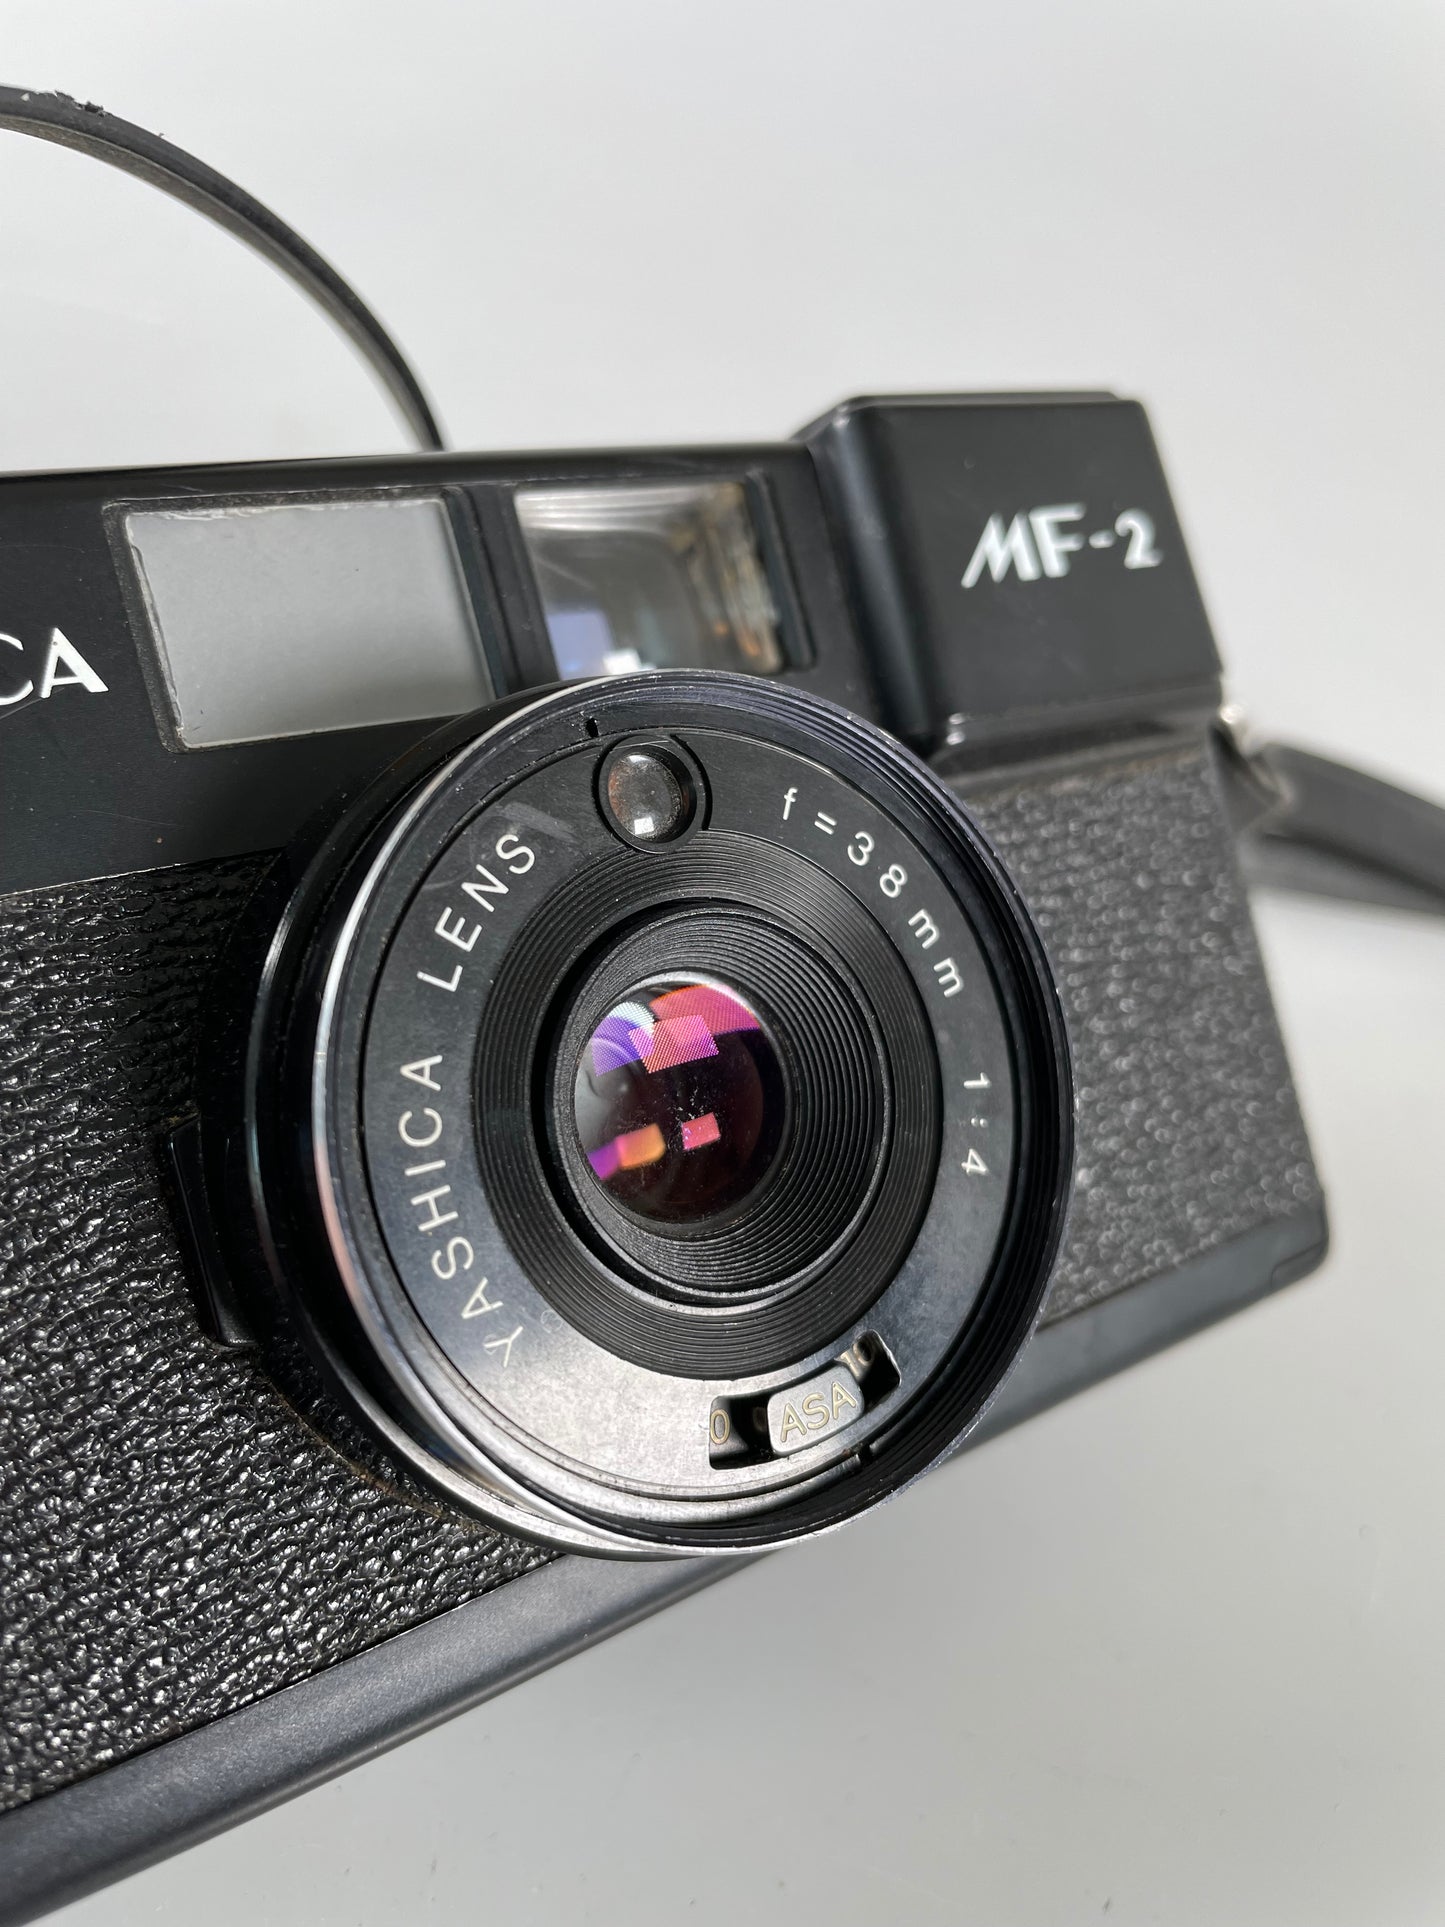 YASHICA MF-2 35mm Point & Shot Film Camera with 38mm F4 Lens